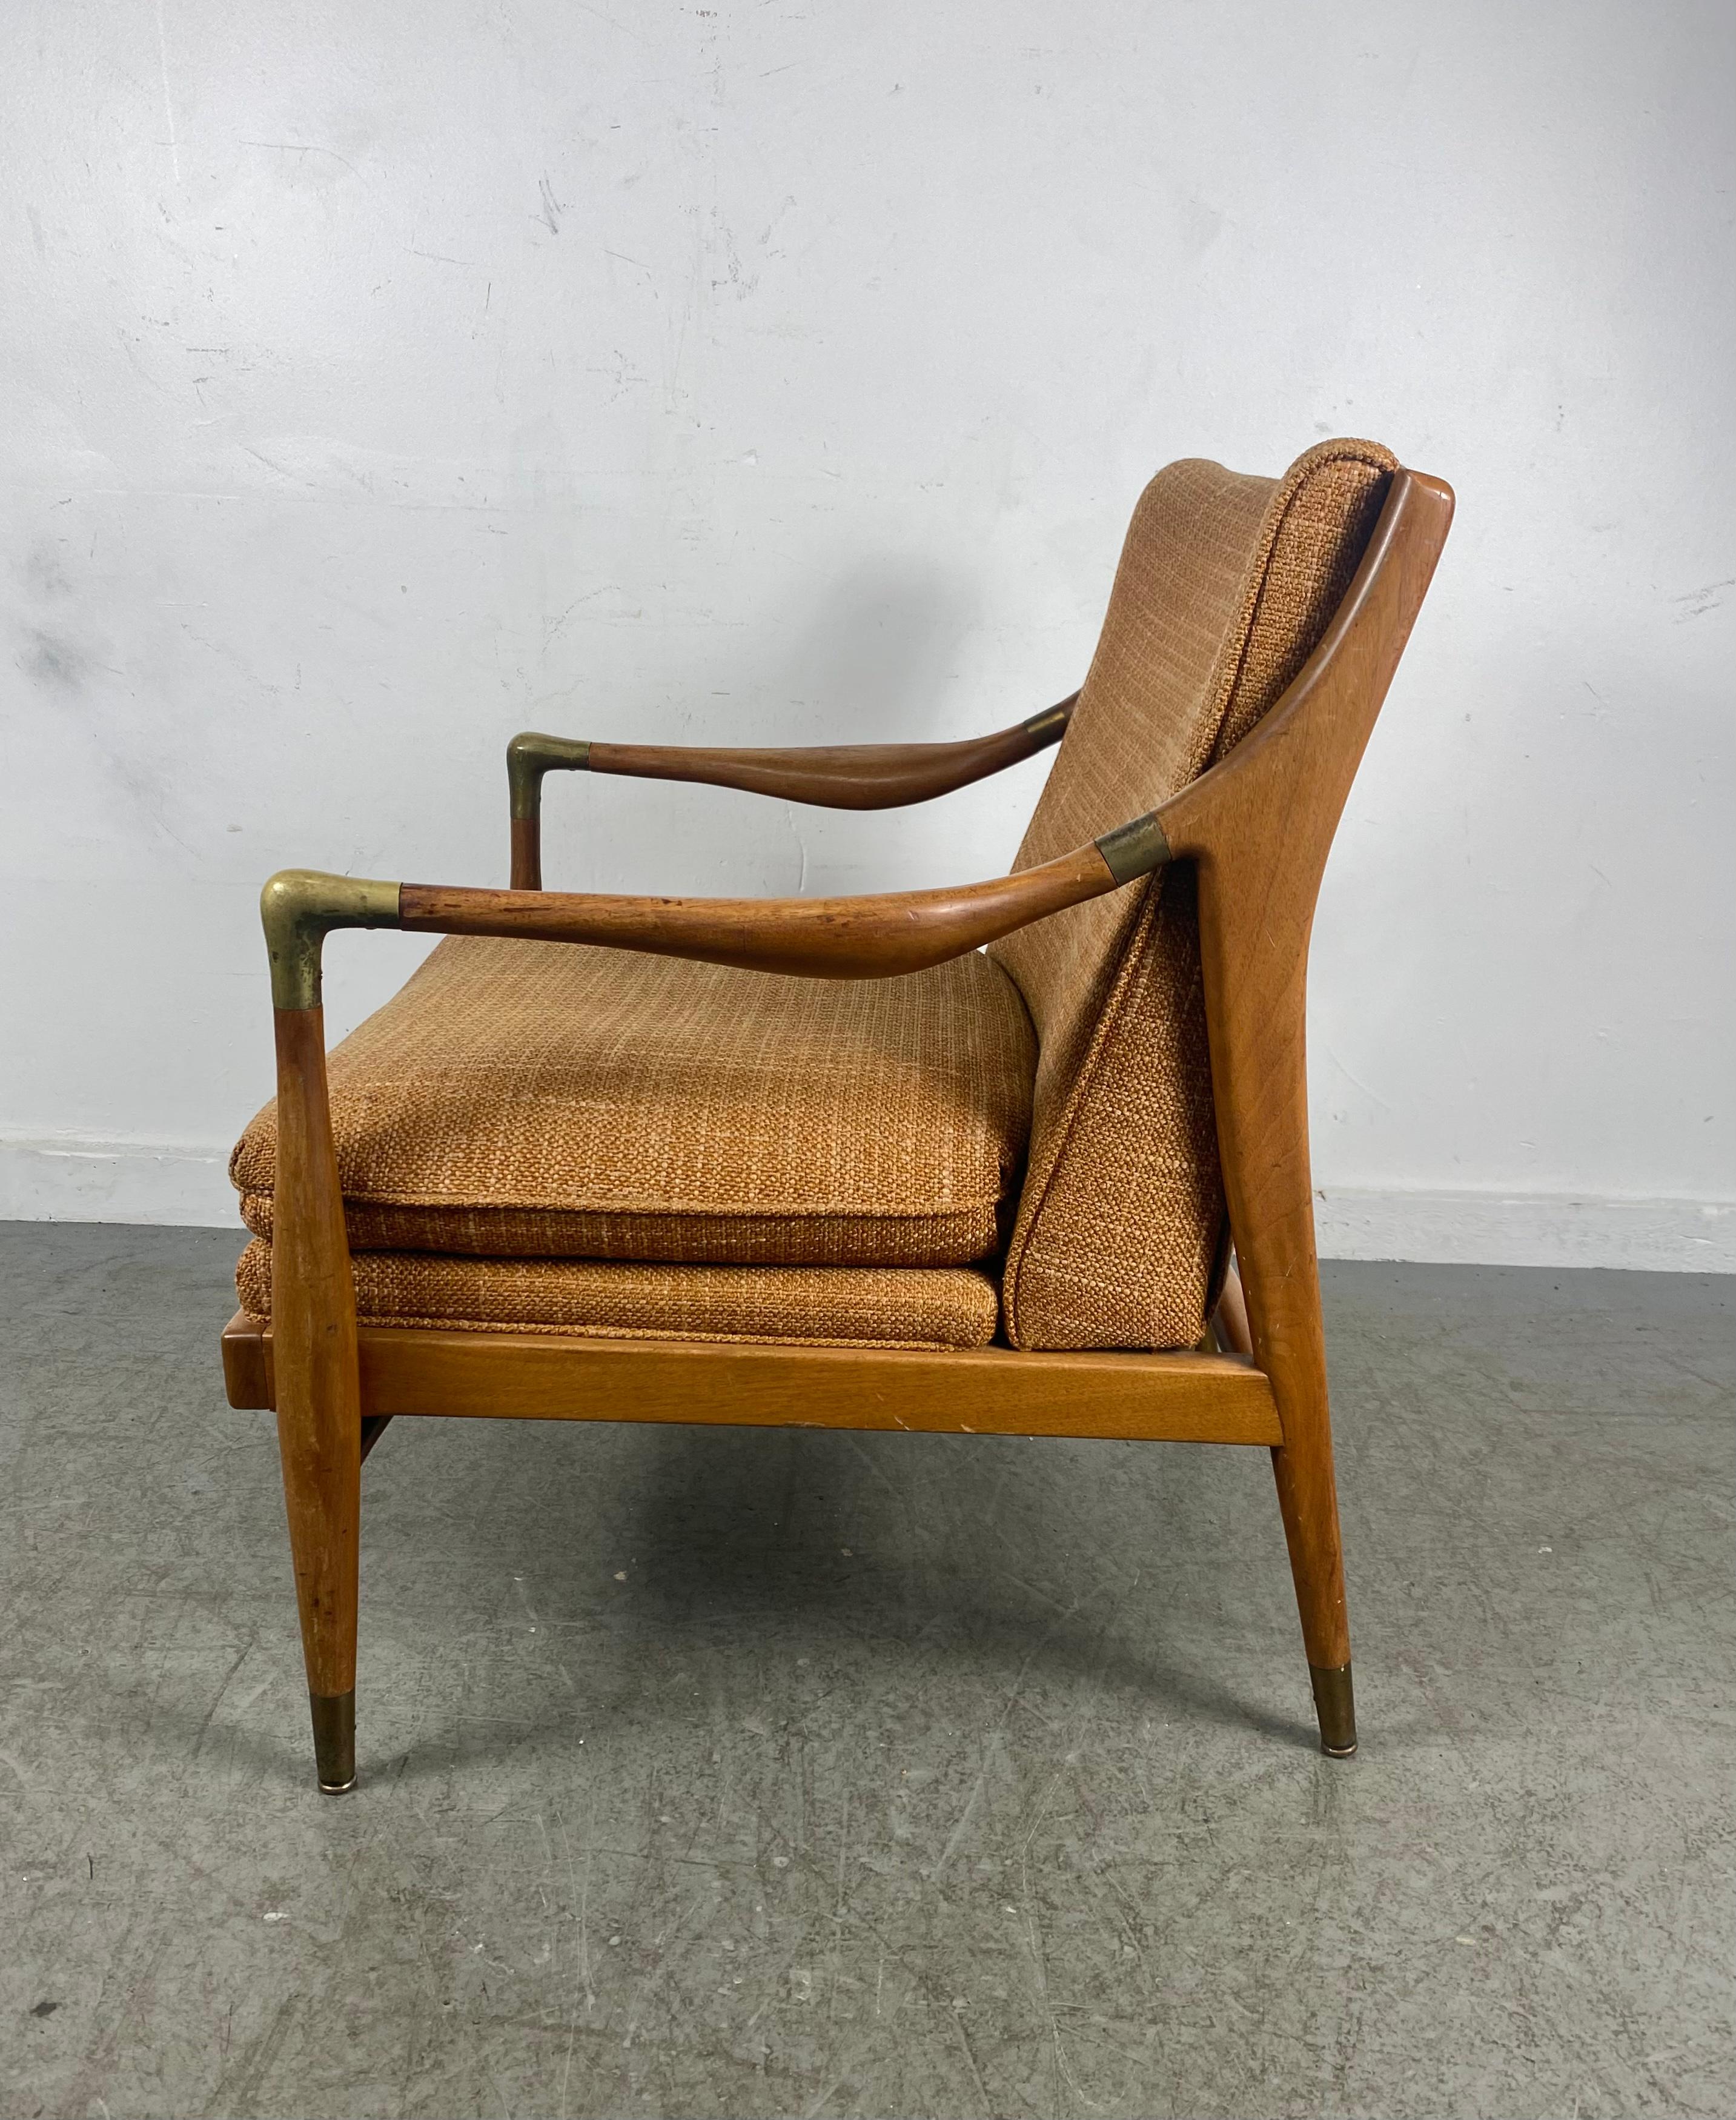 American Mid-Century Modern Lounge Chair, Walnut /Brass Accents, Jamestown Royal Up Co